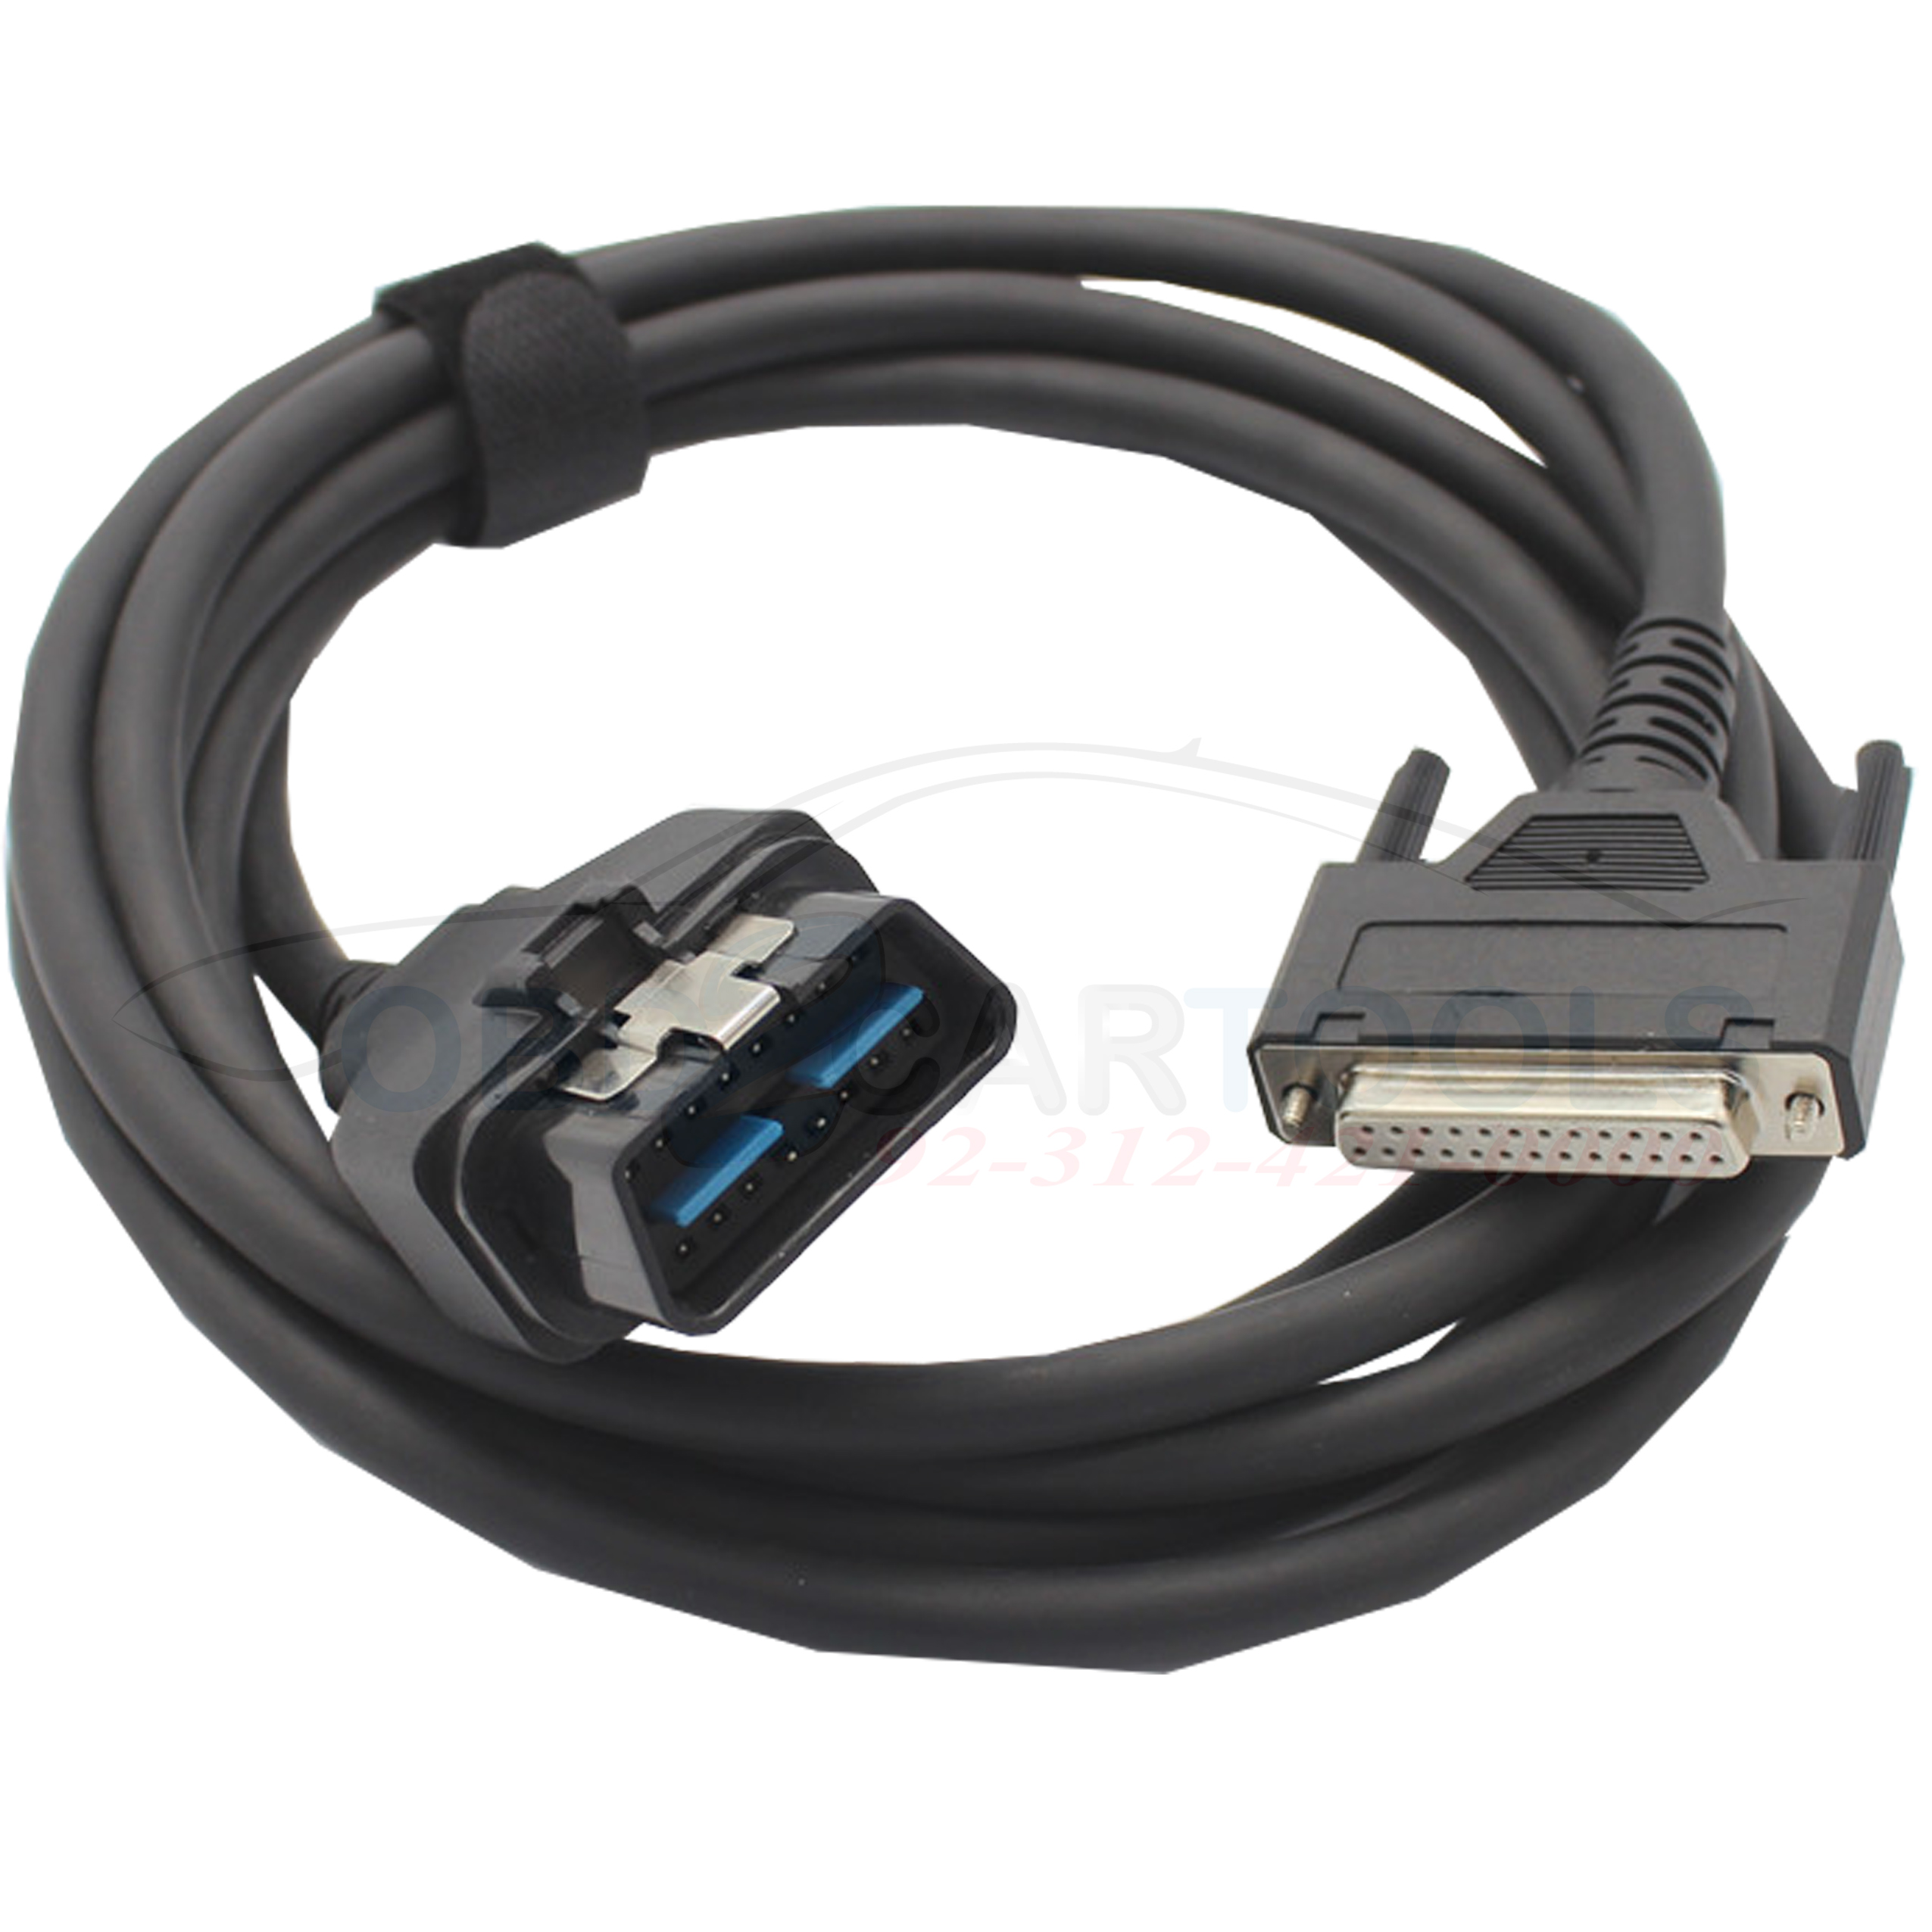 Product image for IT2 Main Test Cable for Toyota Intelligent Tester IT2